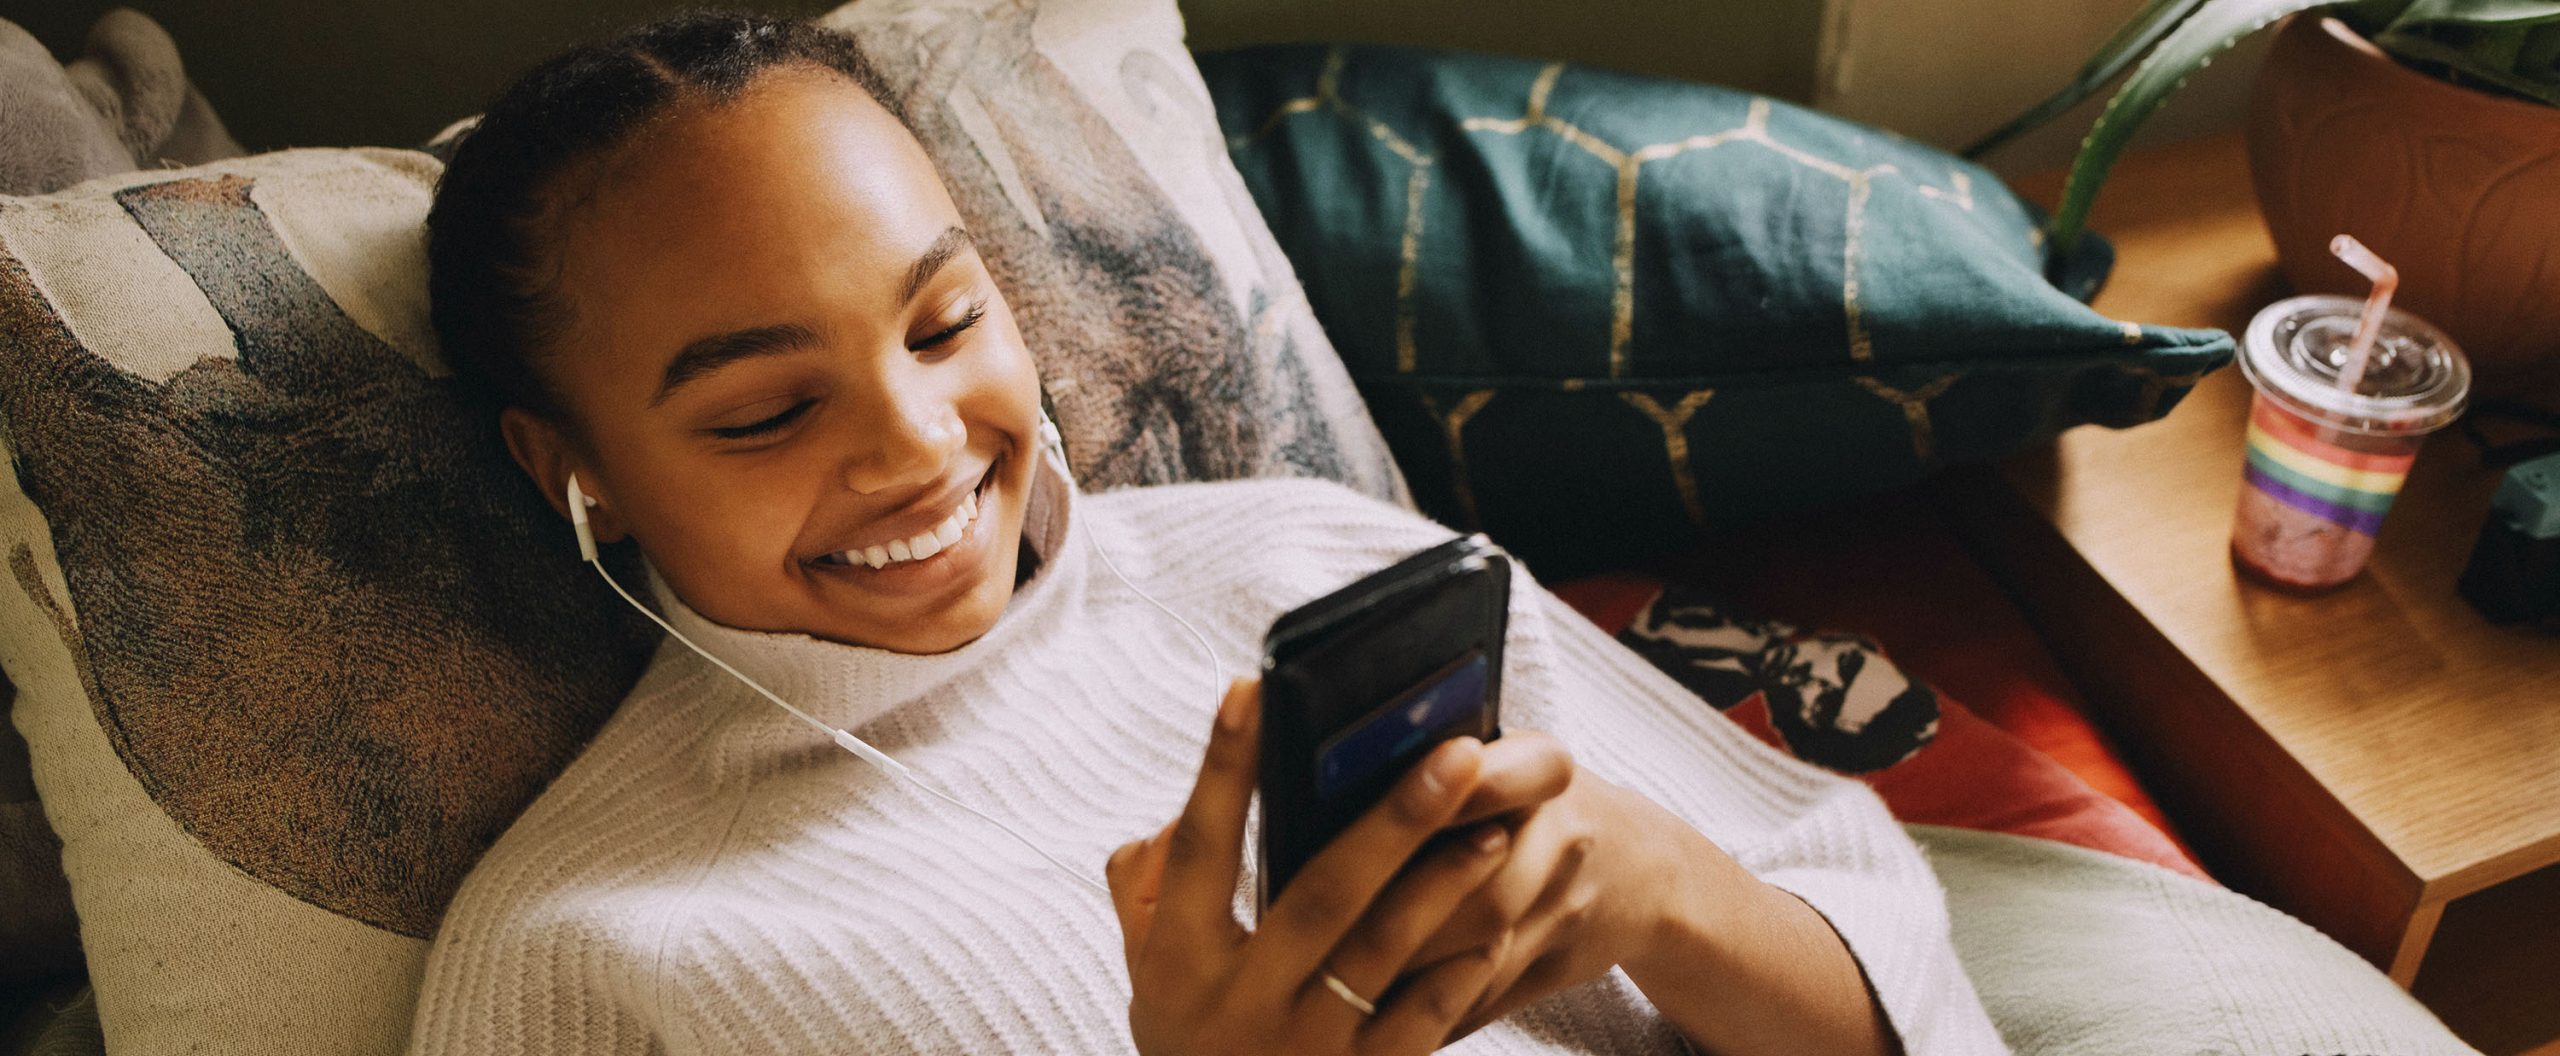 A woman reclines on a pillow and smiles while looking at her mobile phone.